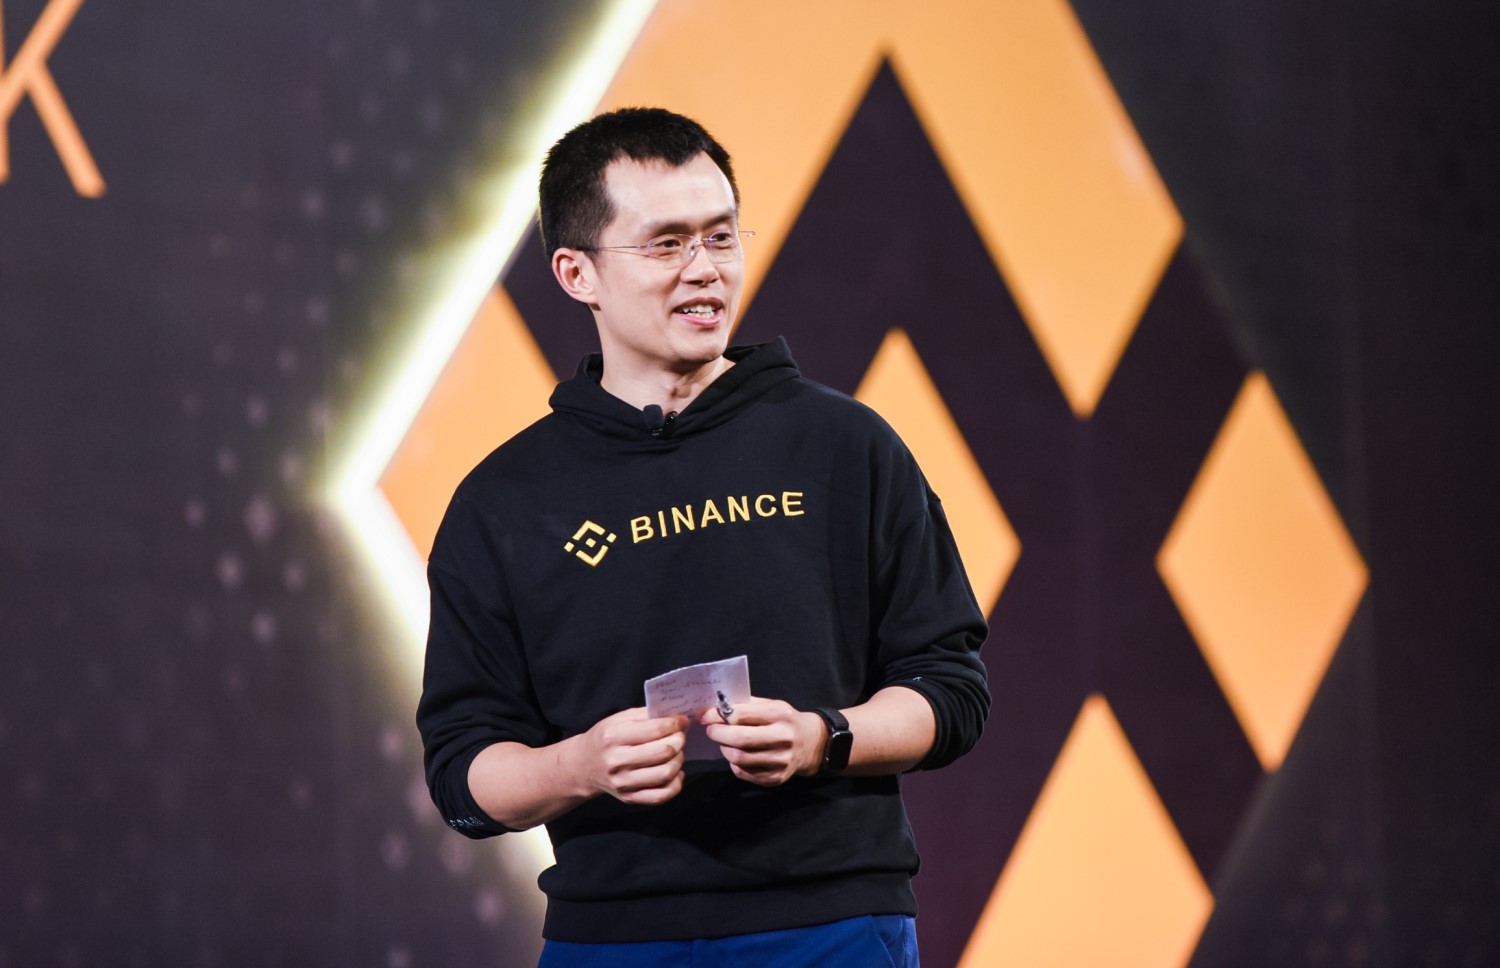 Binance Now Accepting Fiat Through Alipay, WeChat